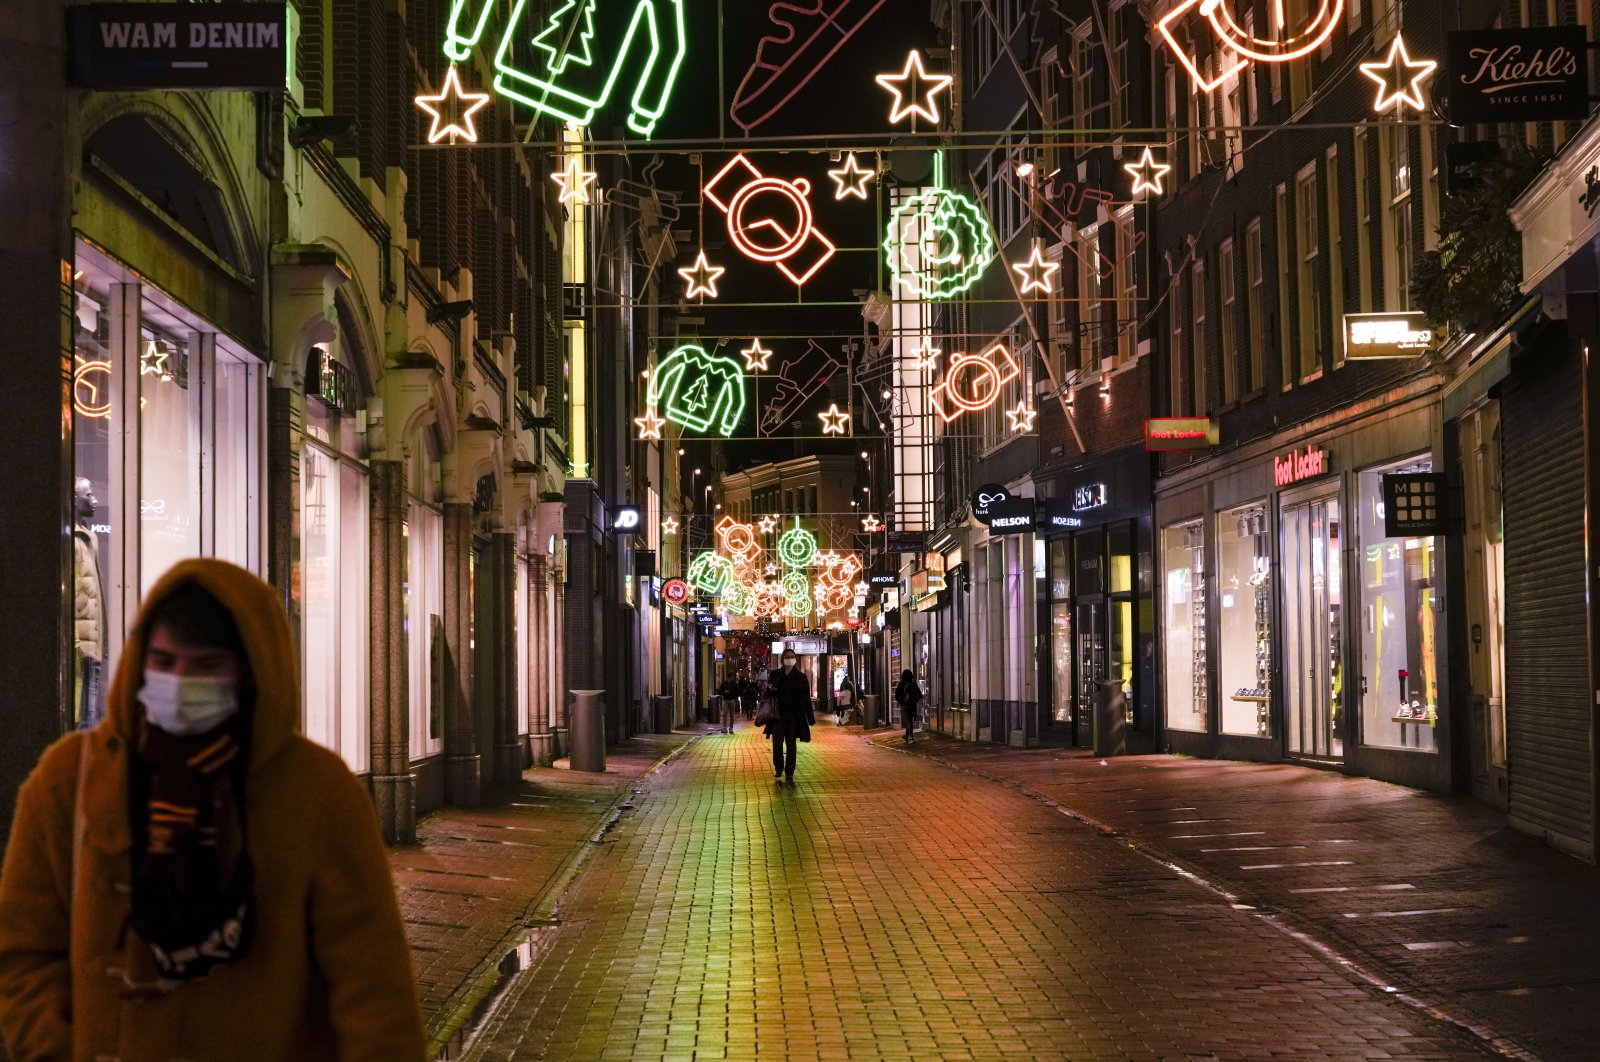 The shopping streets are near-empty after 5 p.m. in Amsterdam, Netherlands, Nov. 29, 2021. (AP Photo)